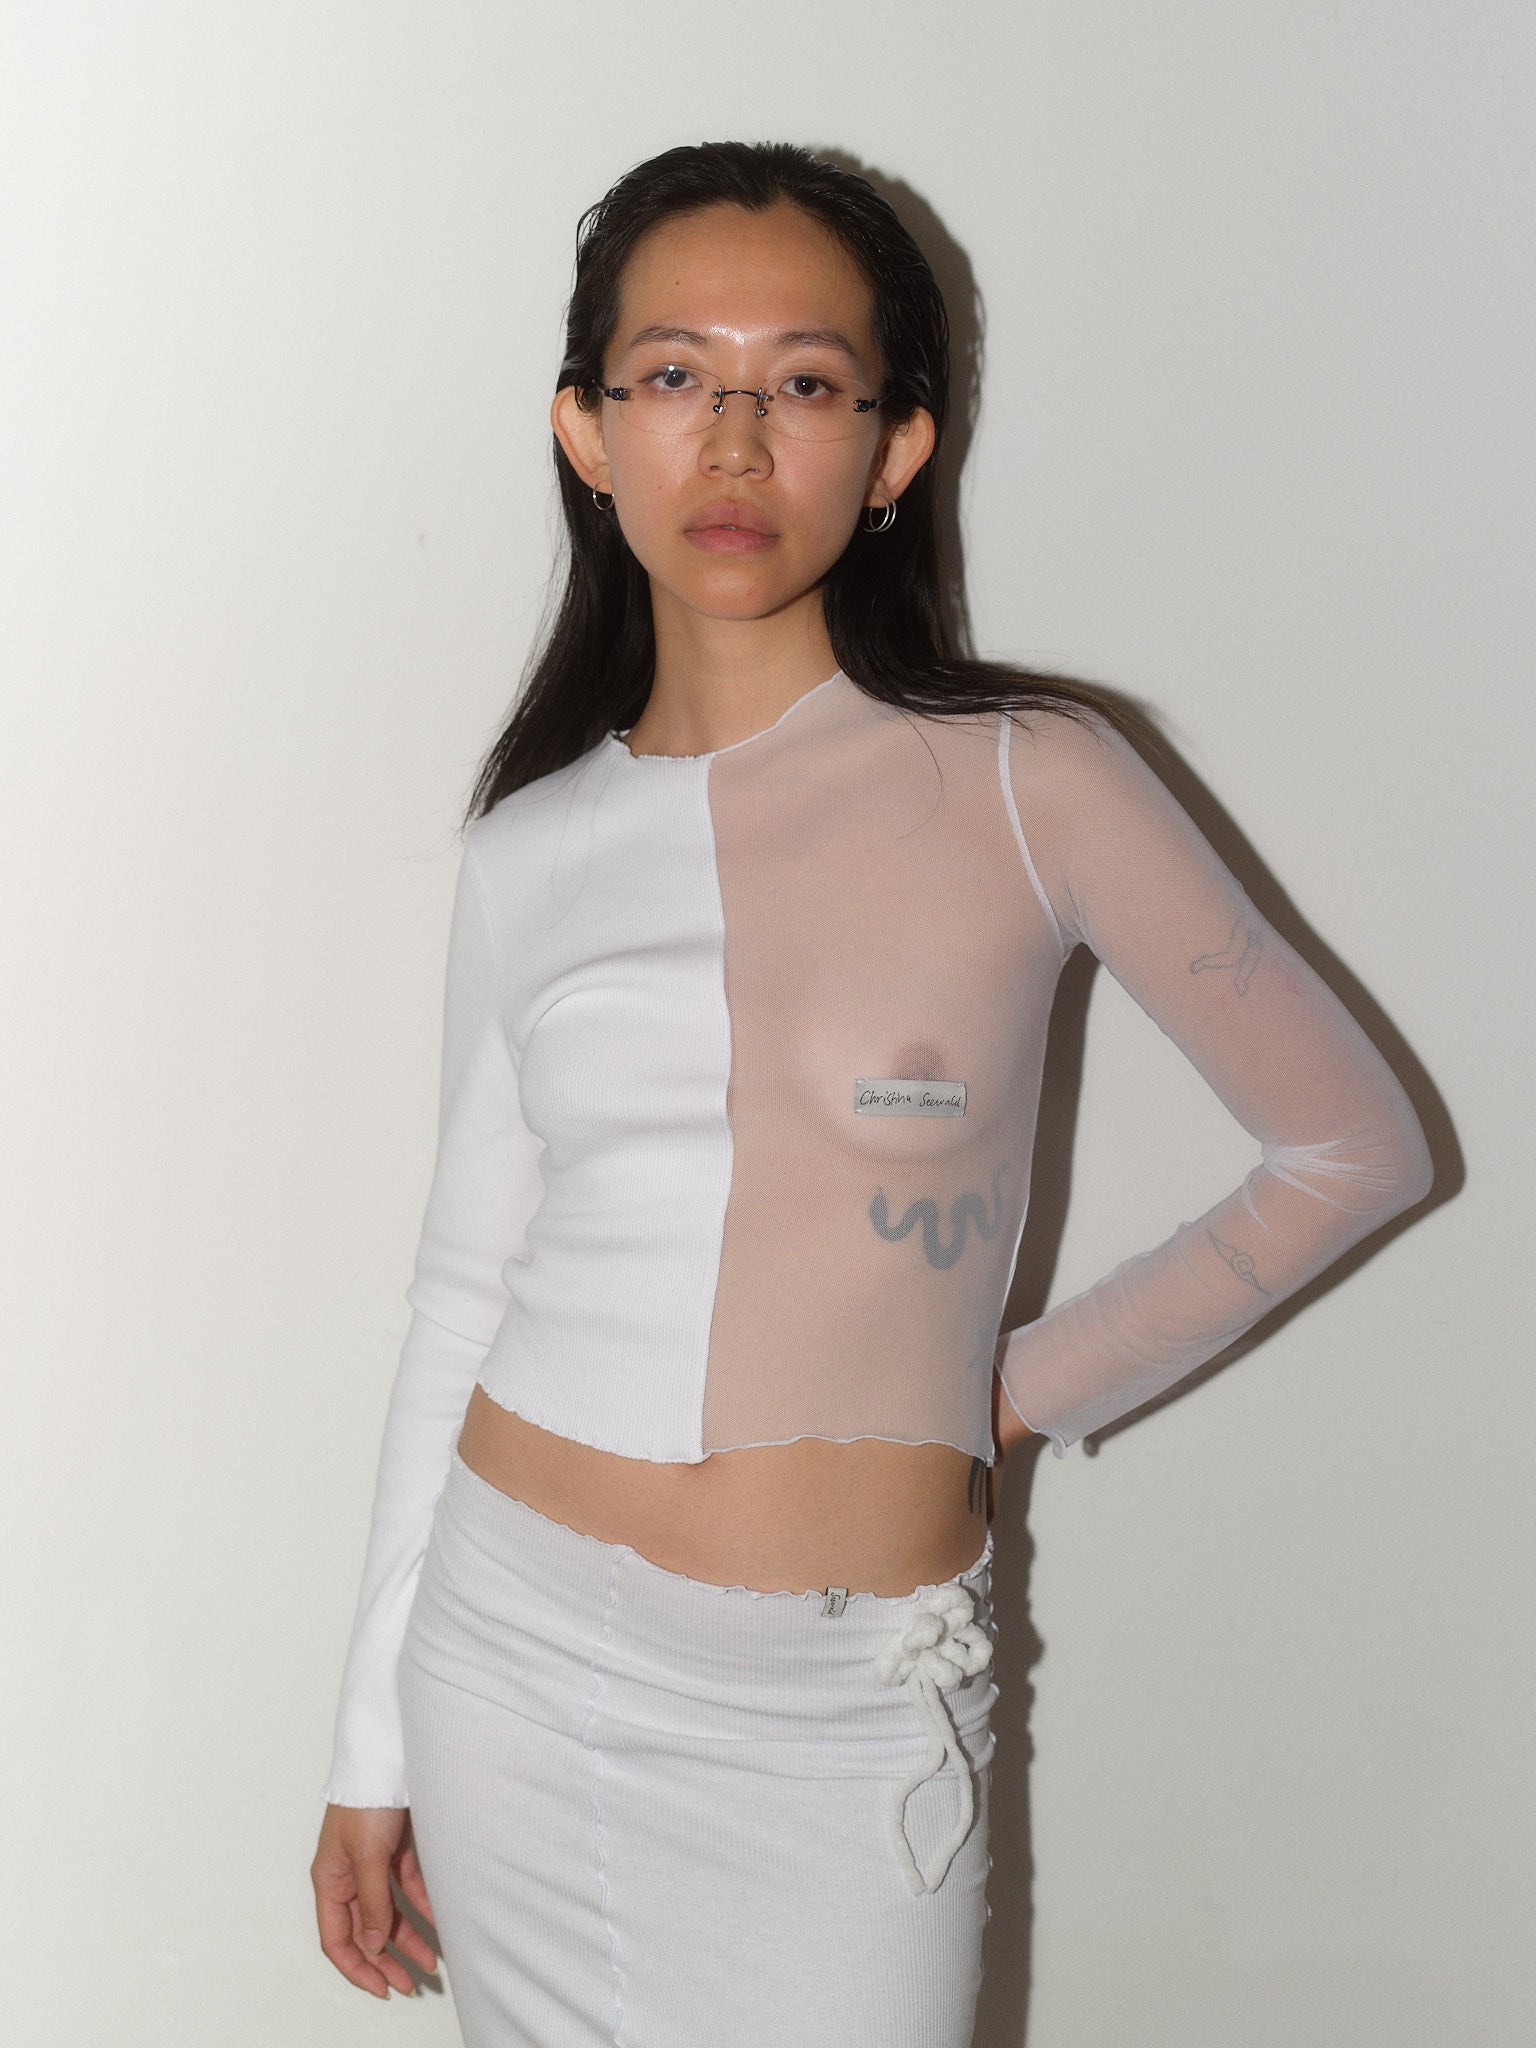 Split Sheer Longsleeve designed by Christina Seewald. Sustainable, designed and made in Europe.